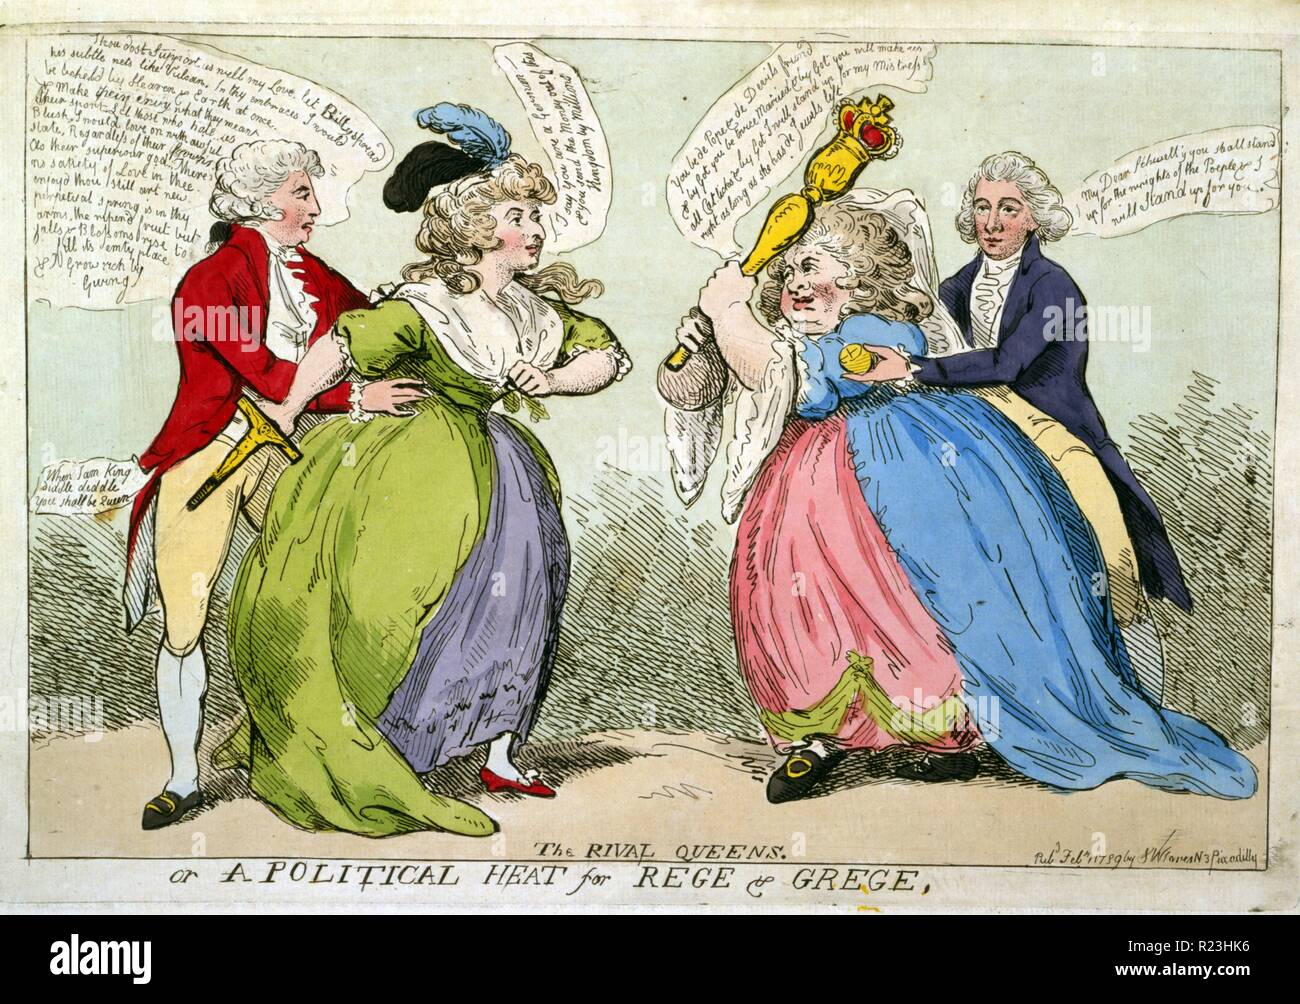 The rival queens or a political heat for Rege & Grege. An encounter between two stout ladies, Mrs. Fitzherbert and Mrs. Schwellenberg, each with a second: the Prince of Wales, his hands on his lady's waist, and Pitt holding out a lemon to the furious German woman, who raises a massive sceptre in both hands to strike her opponent. Stock Photo